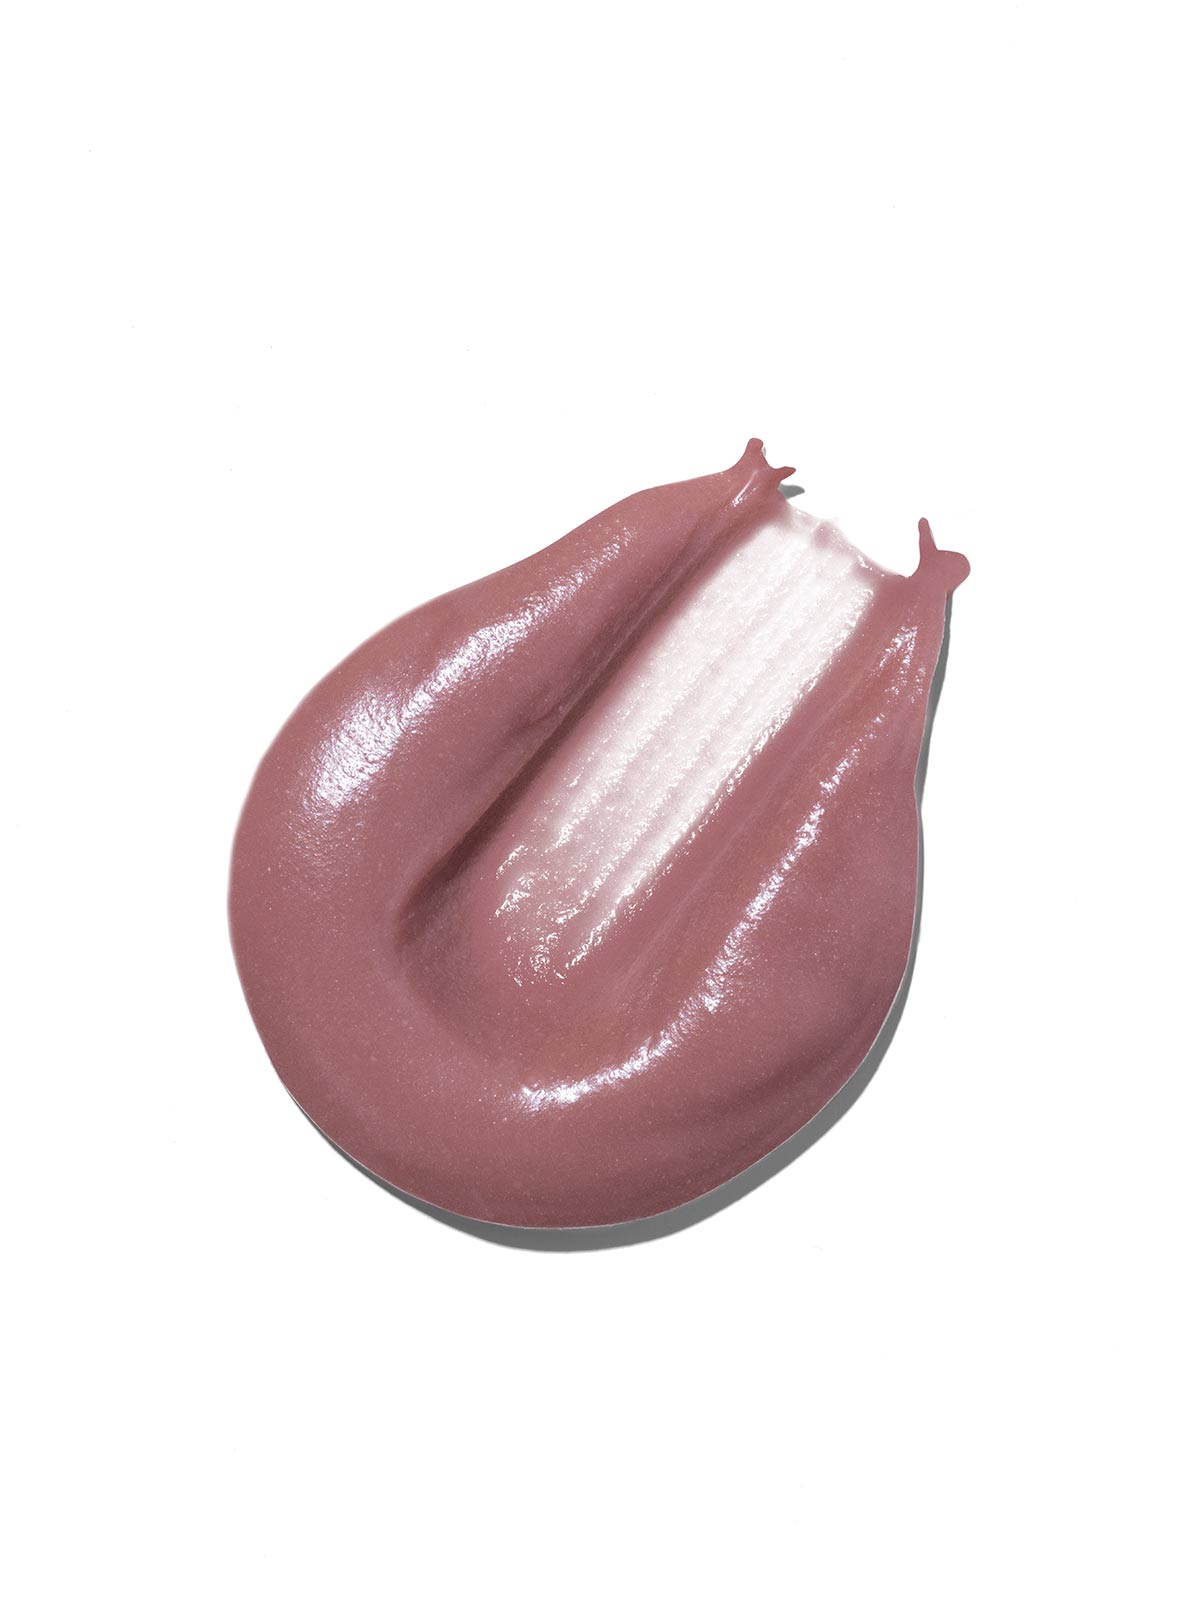 Melting Moment Cleansing Balm Plum